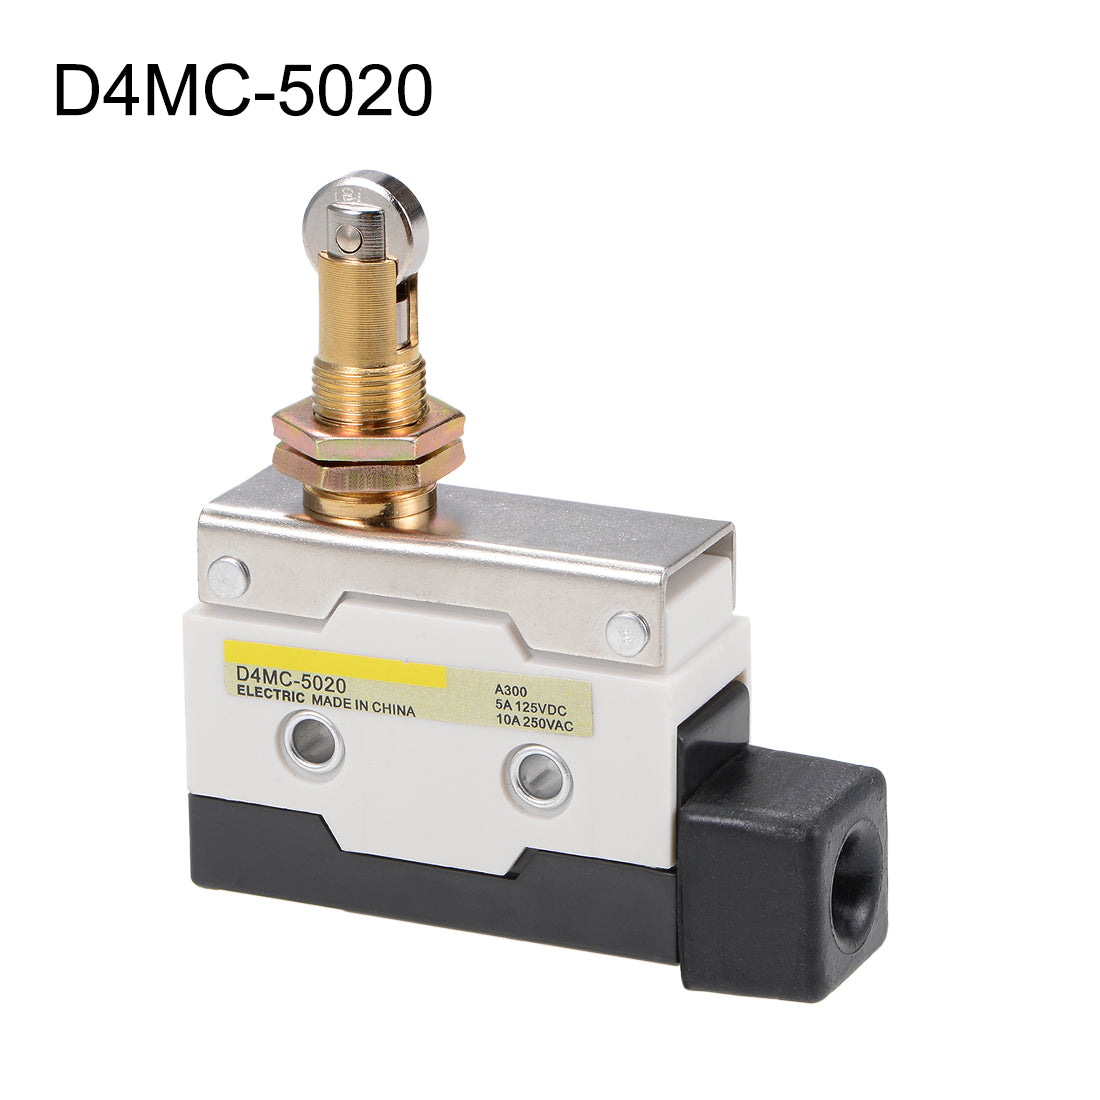 uxcell Uxcell D4MC-5020 Limit Switch, Roller Plunger Micro Momentary Switch Panel Mount 1NC+1NO